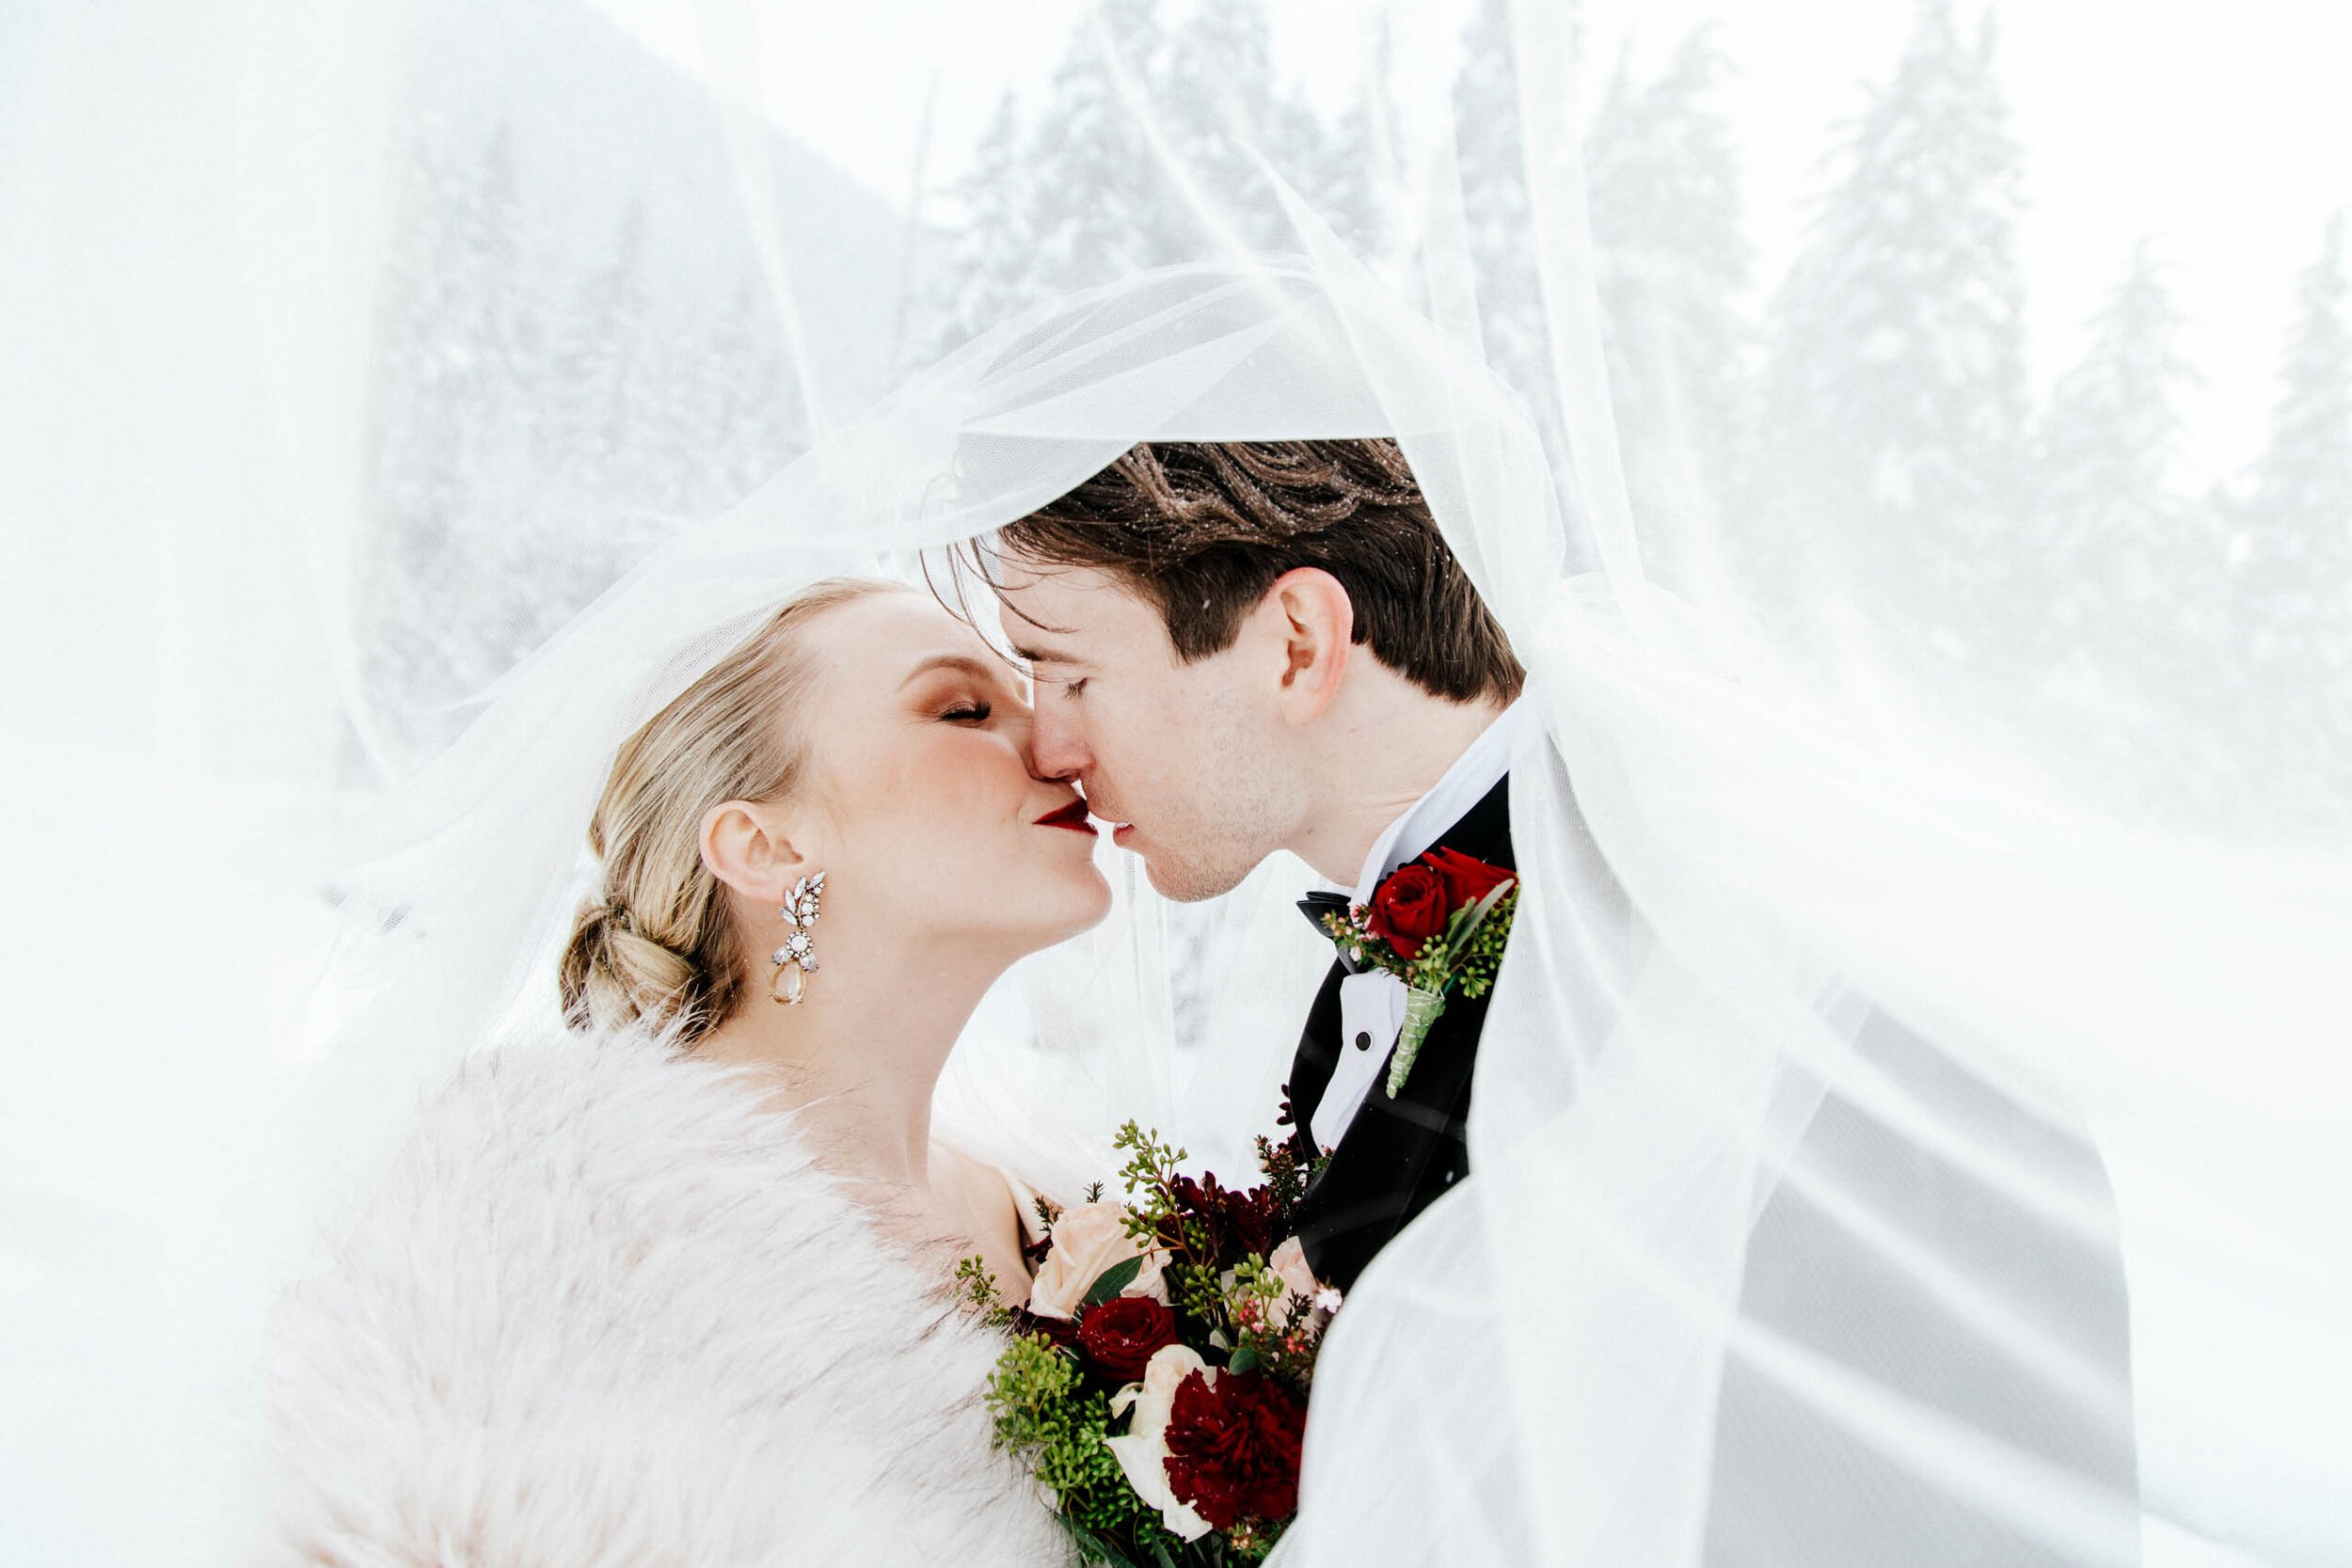 A bride and groom kiss under the brides veil in an artistic photo by beautiful life studios.